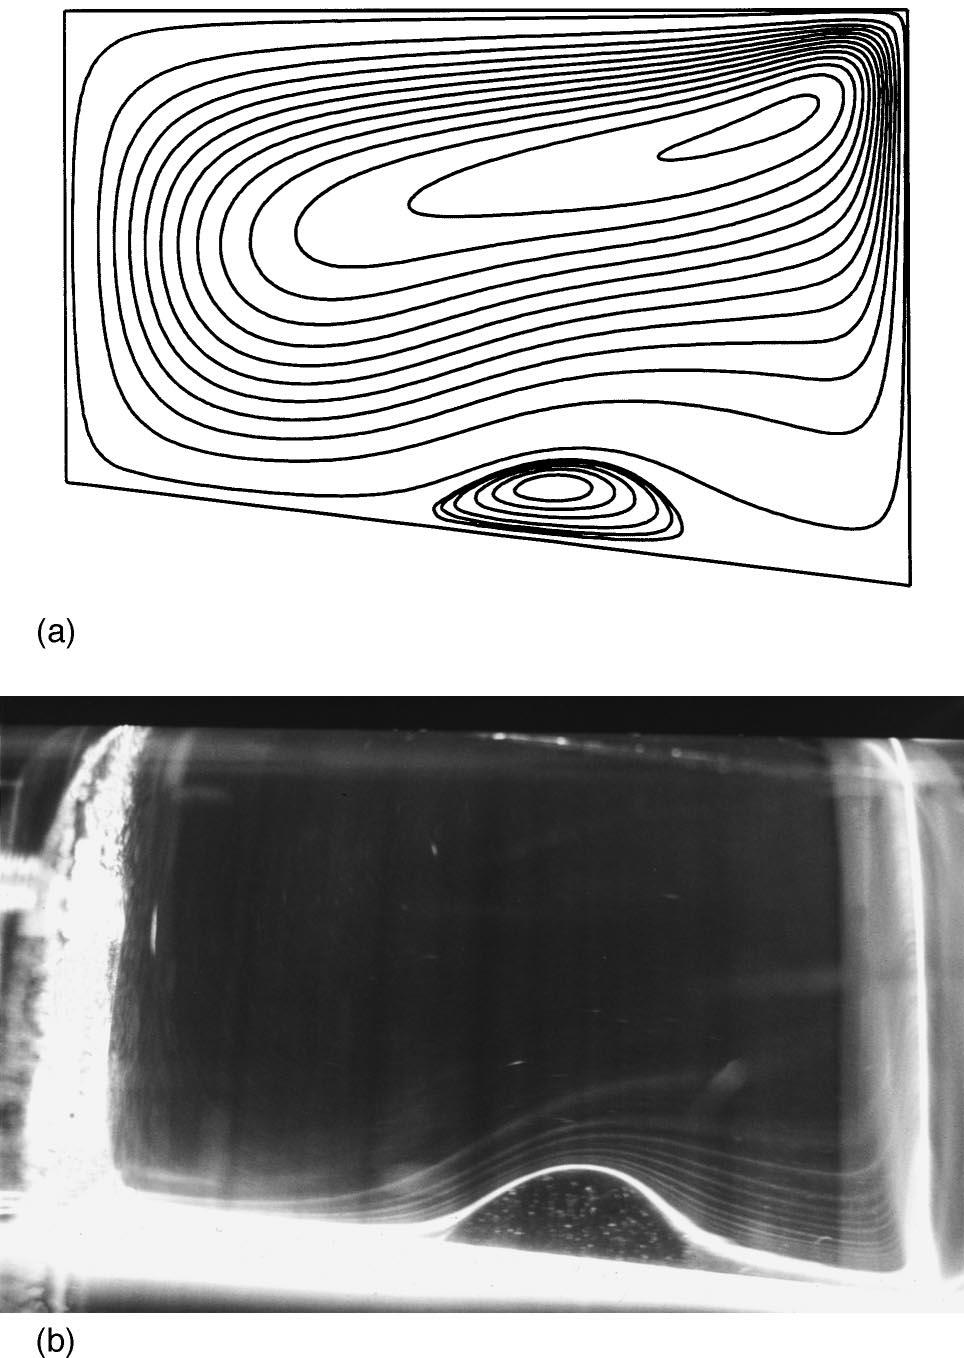 430 Phys. Fluids, Vol. 12, No. 2, February 2000 Mullin et al. FIG. 6. A comparison between a a numerical streamline plot and b an experimental flow visualization for a sloped inner cylinder with 1.